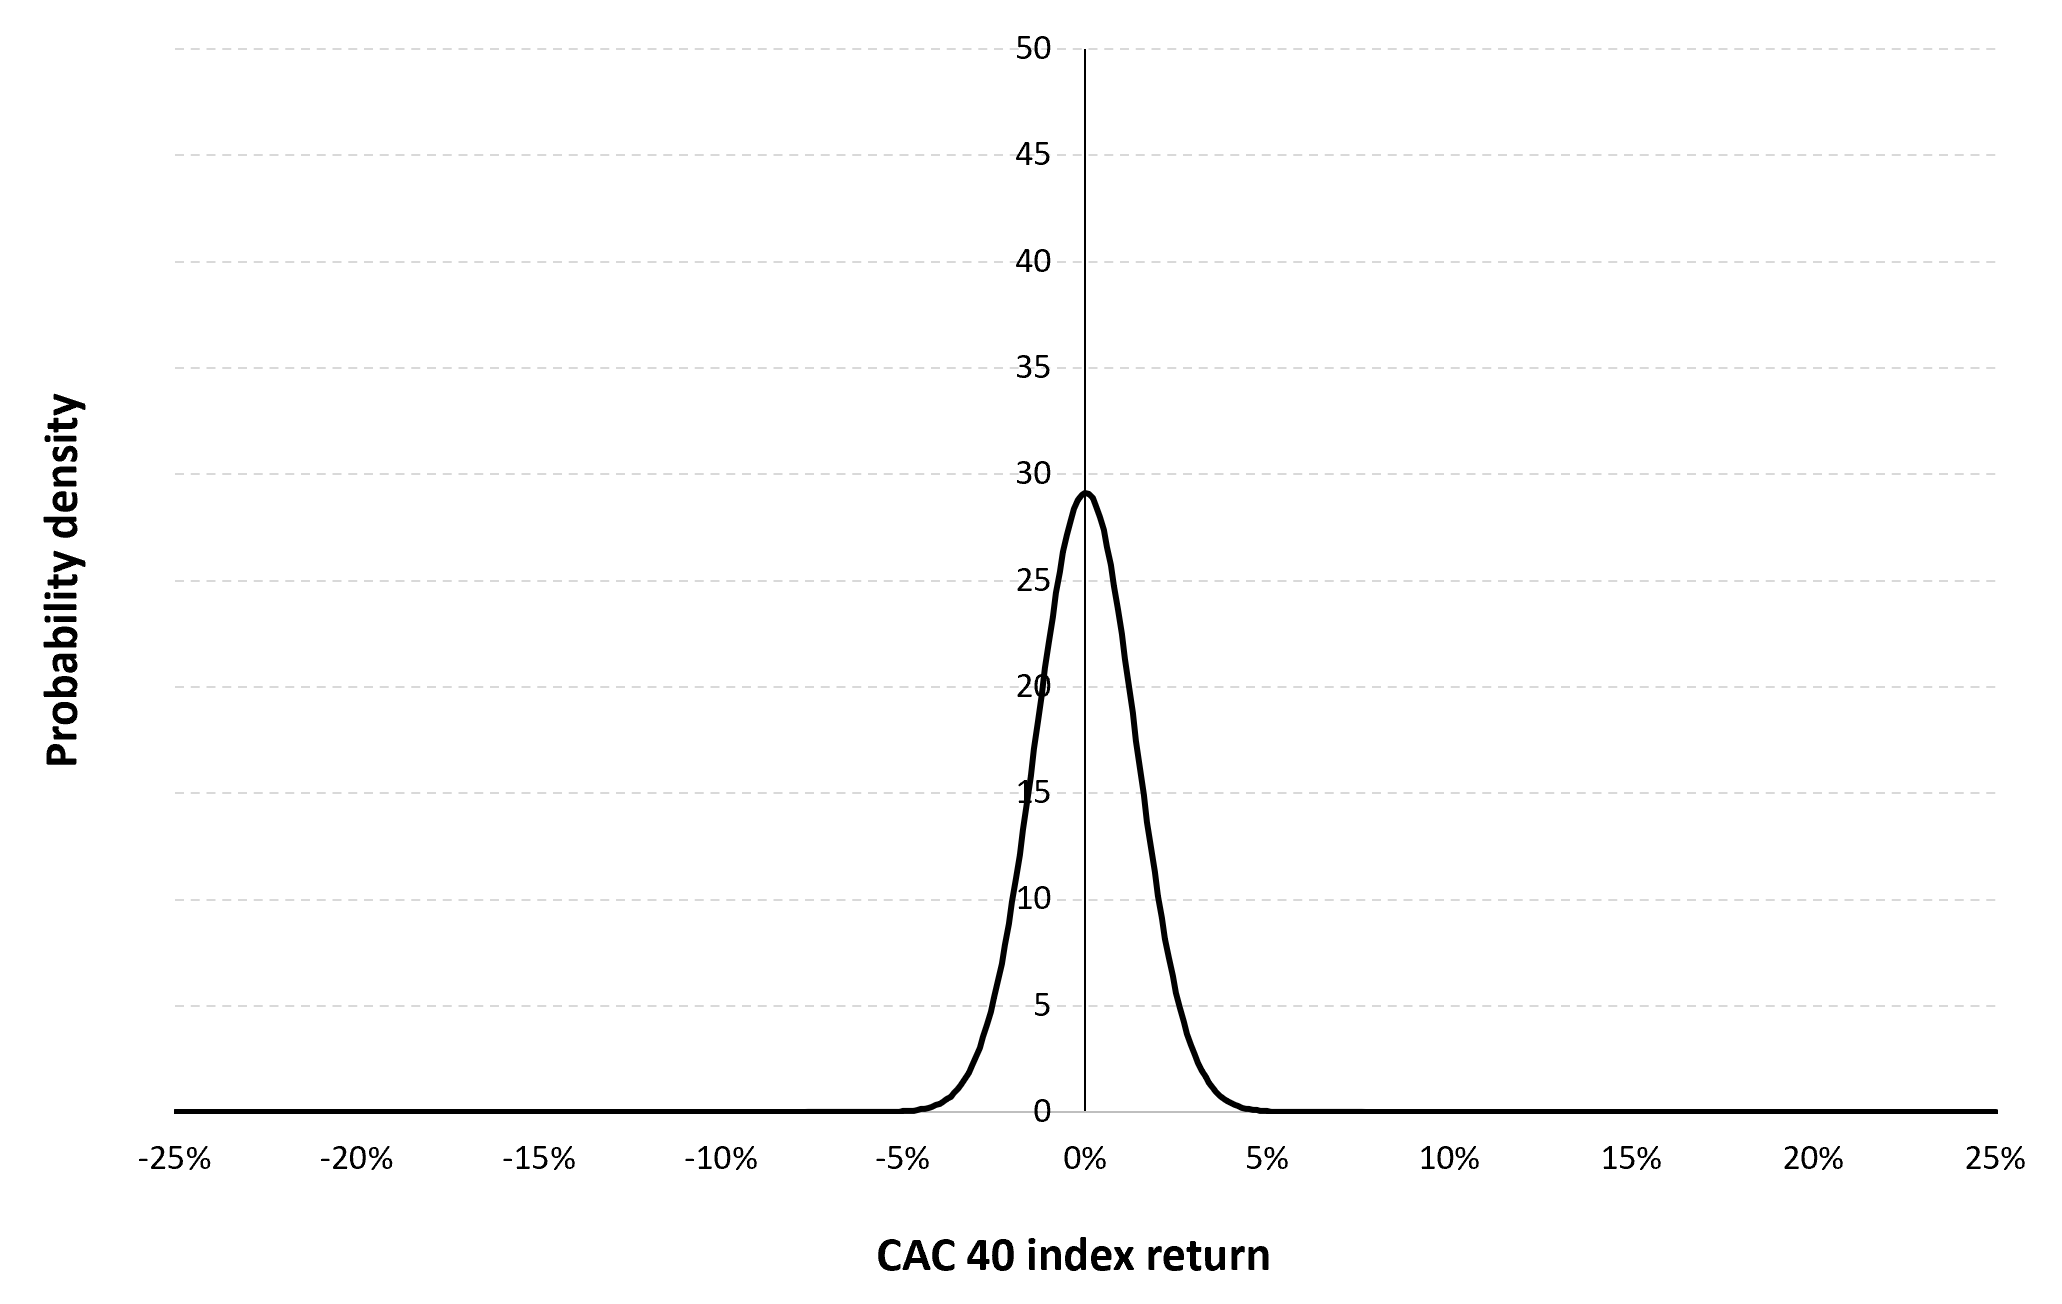 Gaussian distribution of the daily CAC 40 index returns